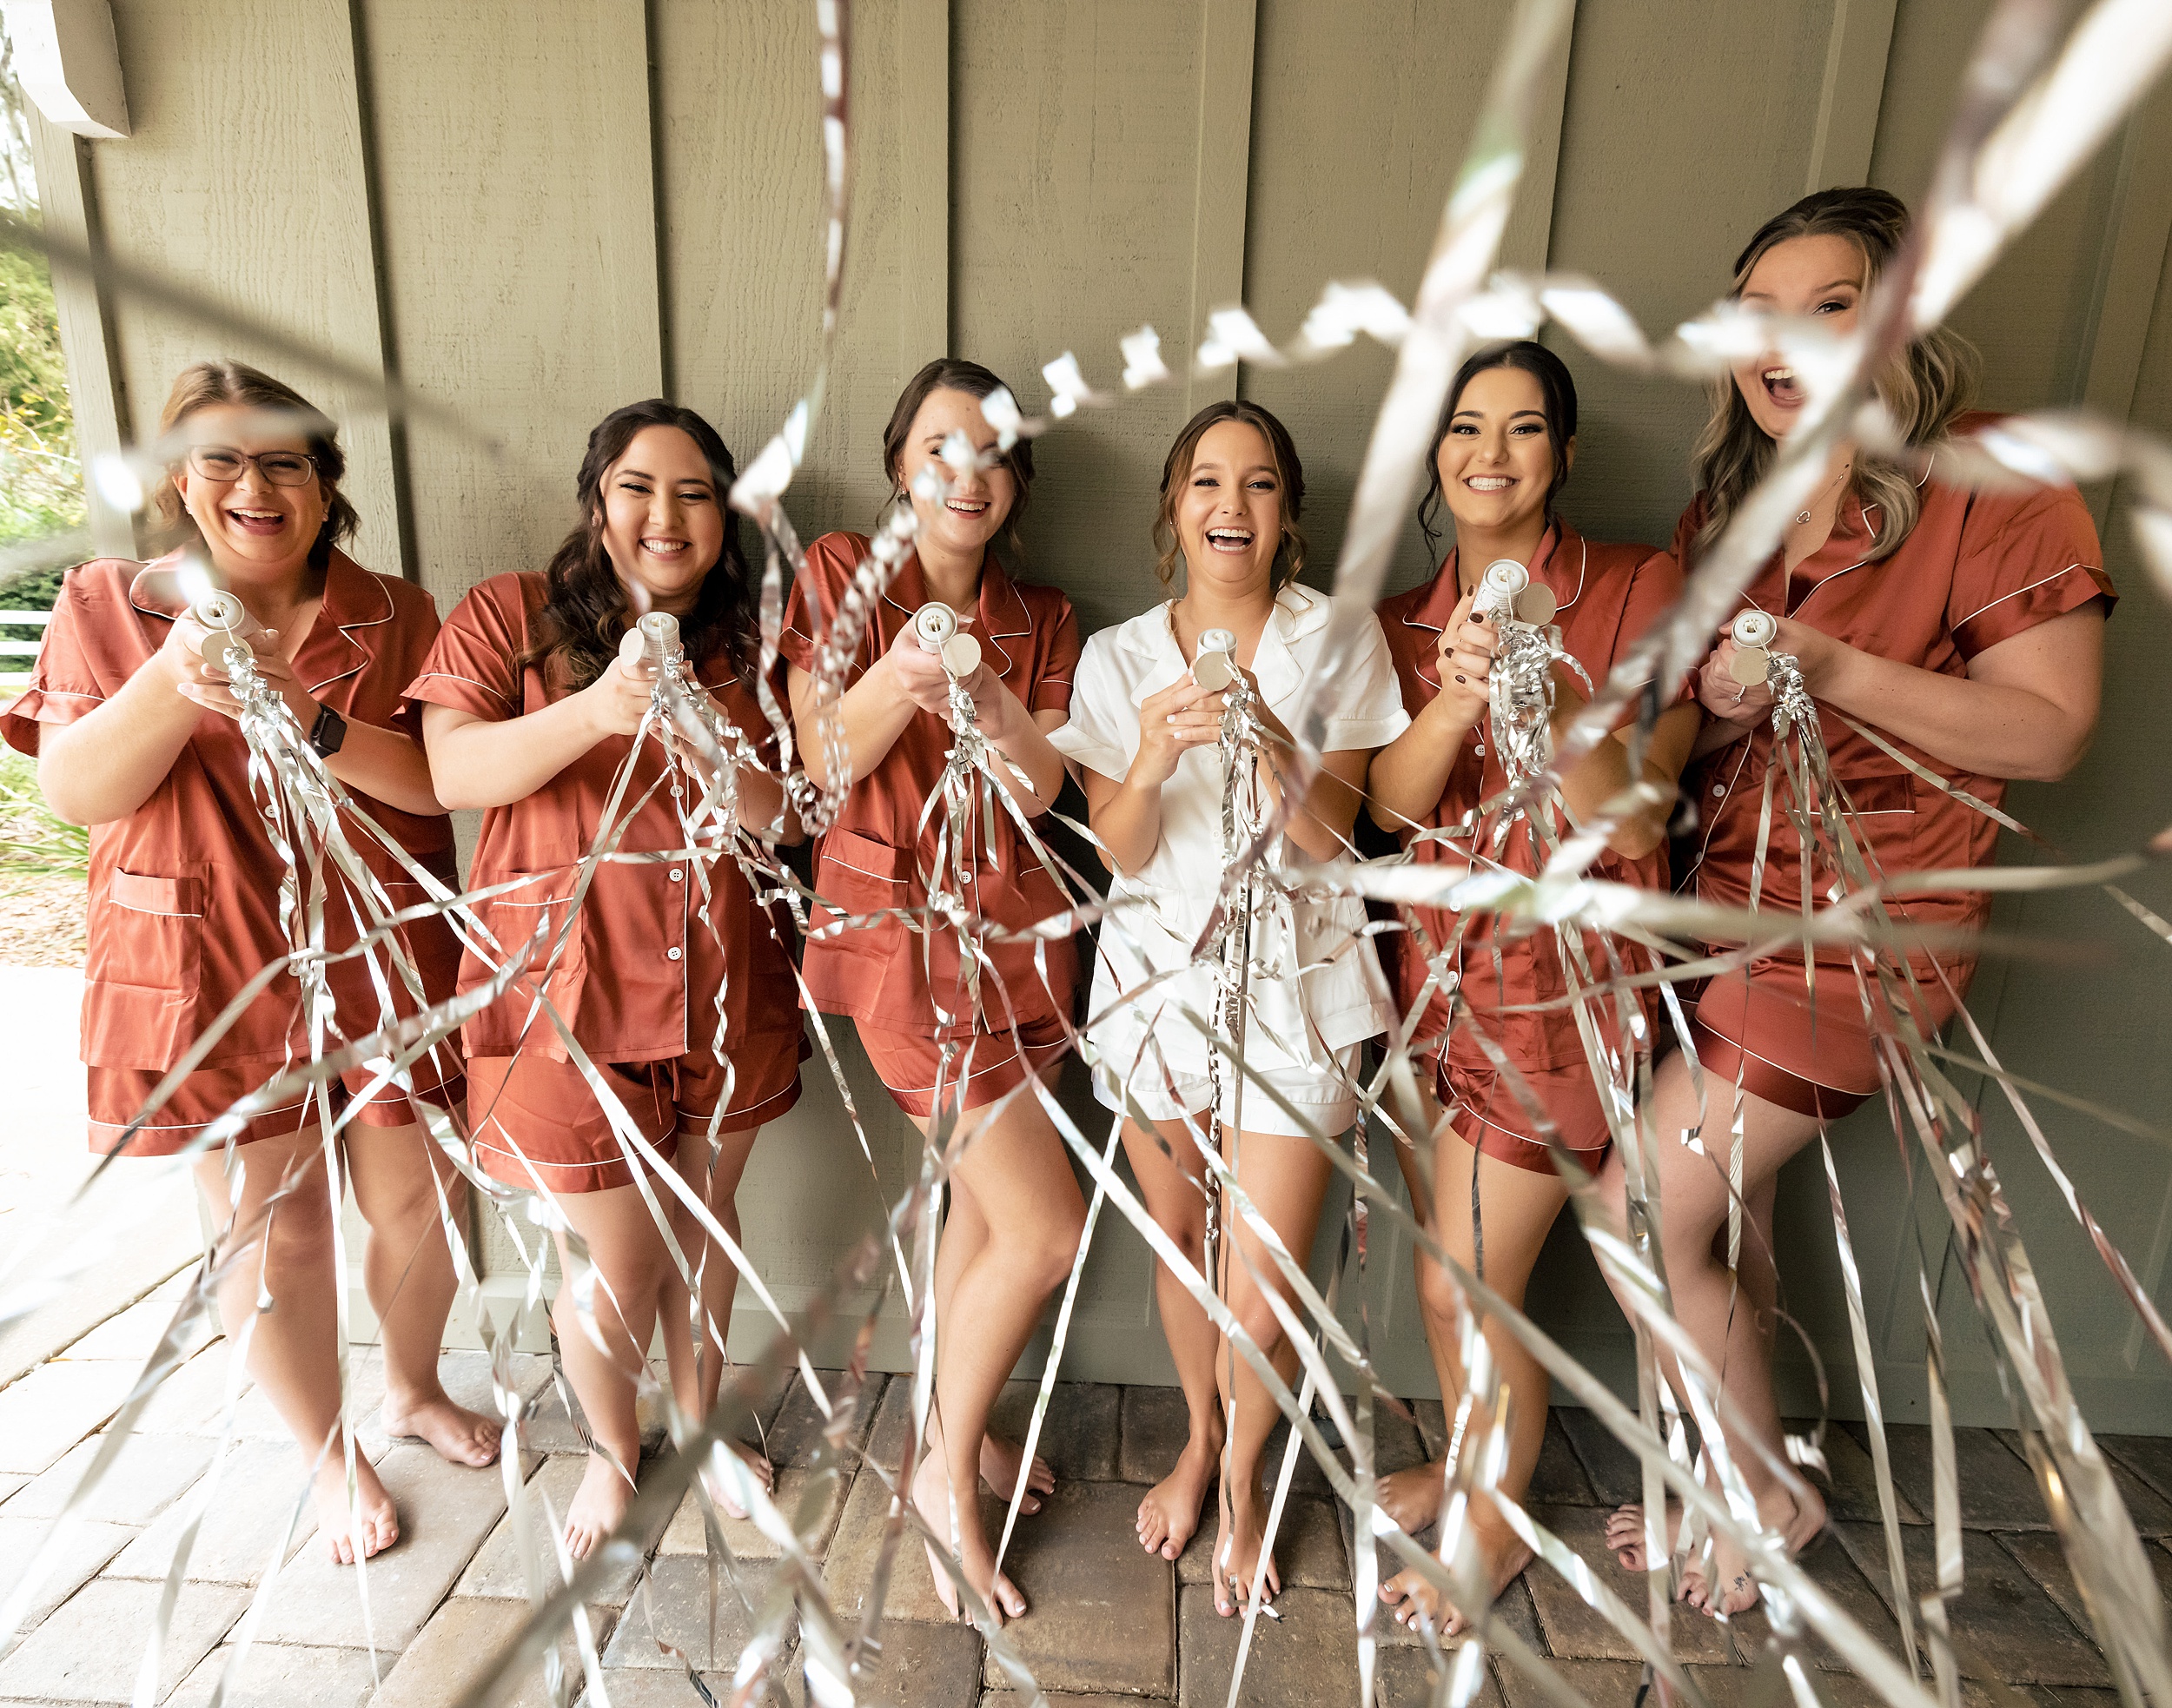 A bride shoots streams while laughing with her bridal party on a patio